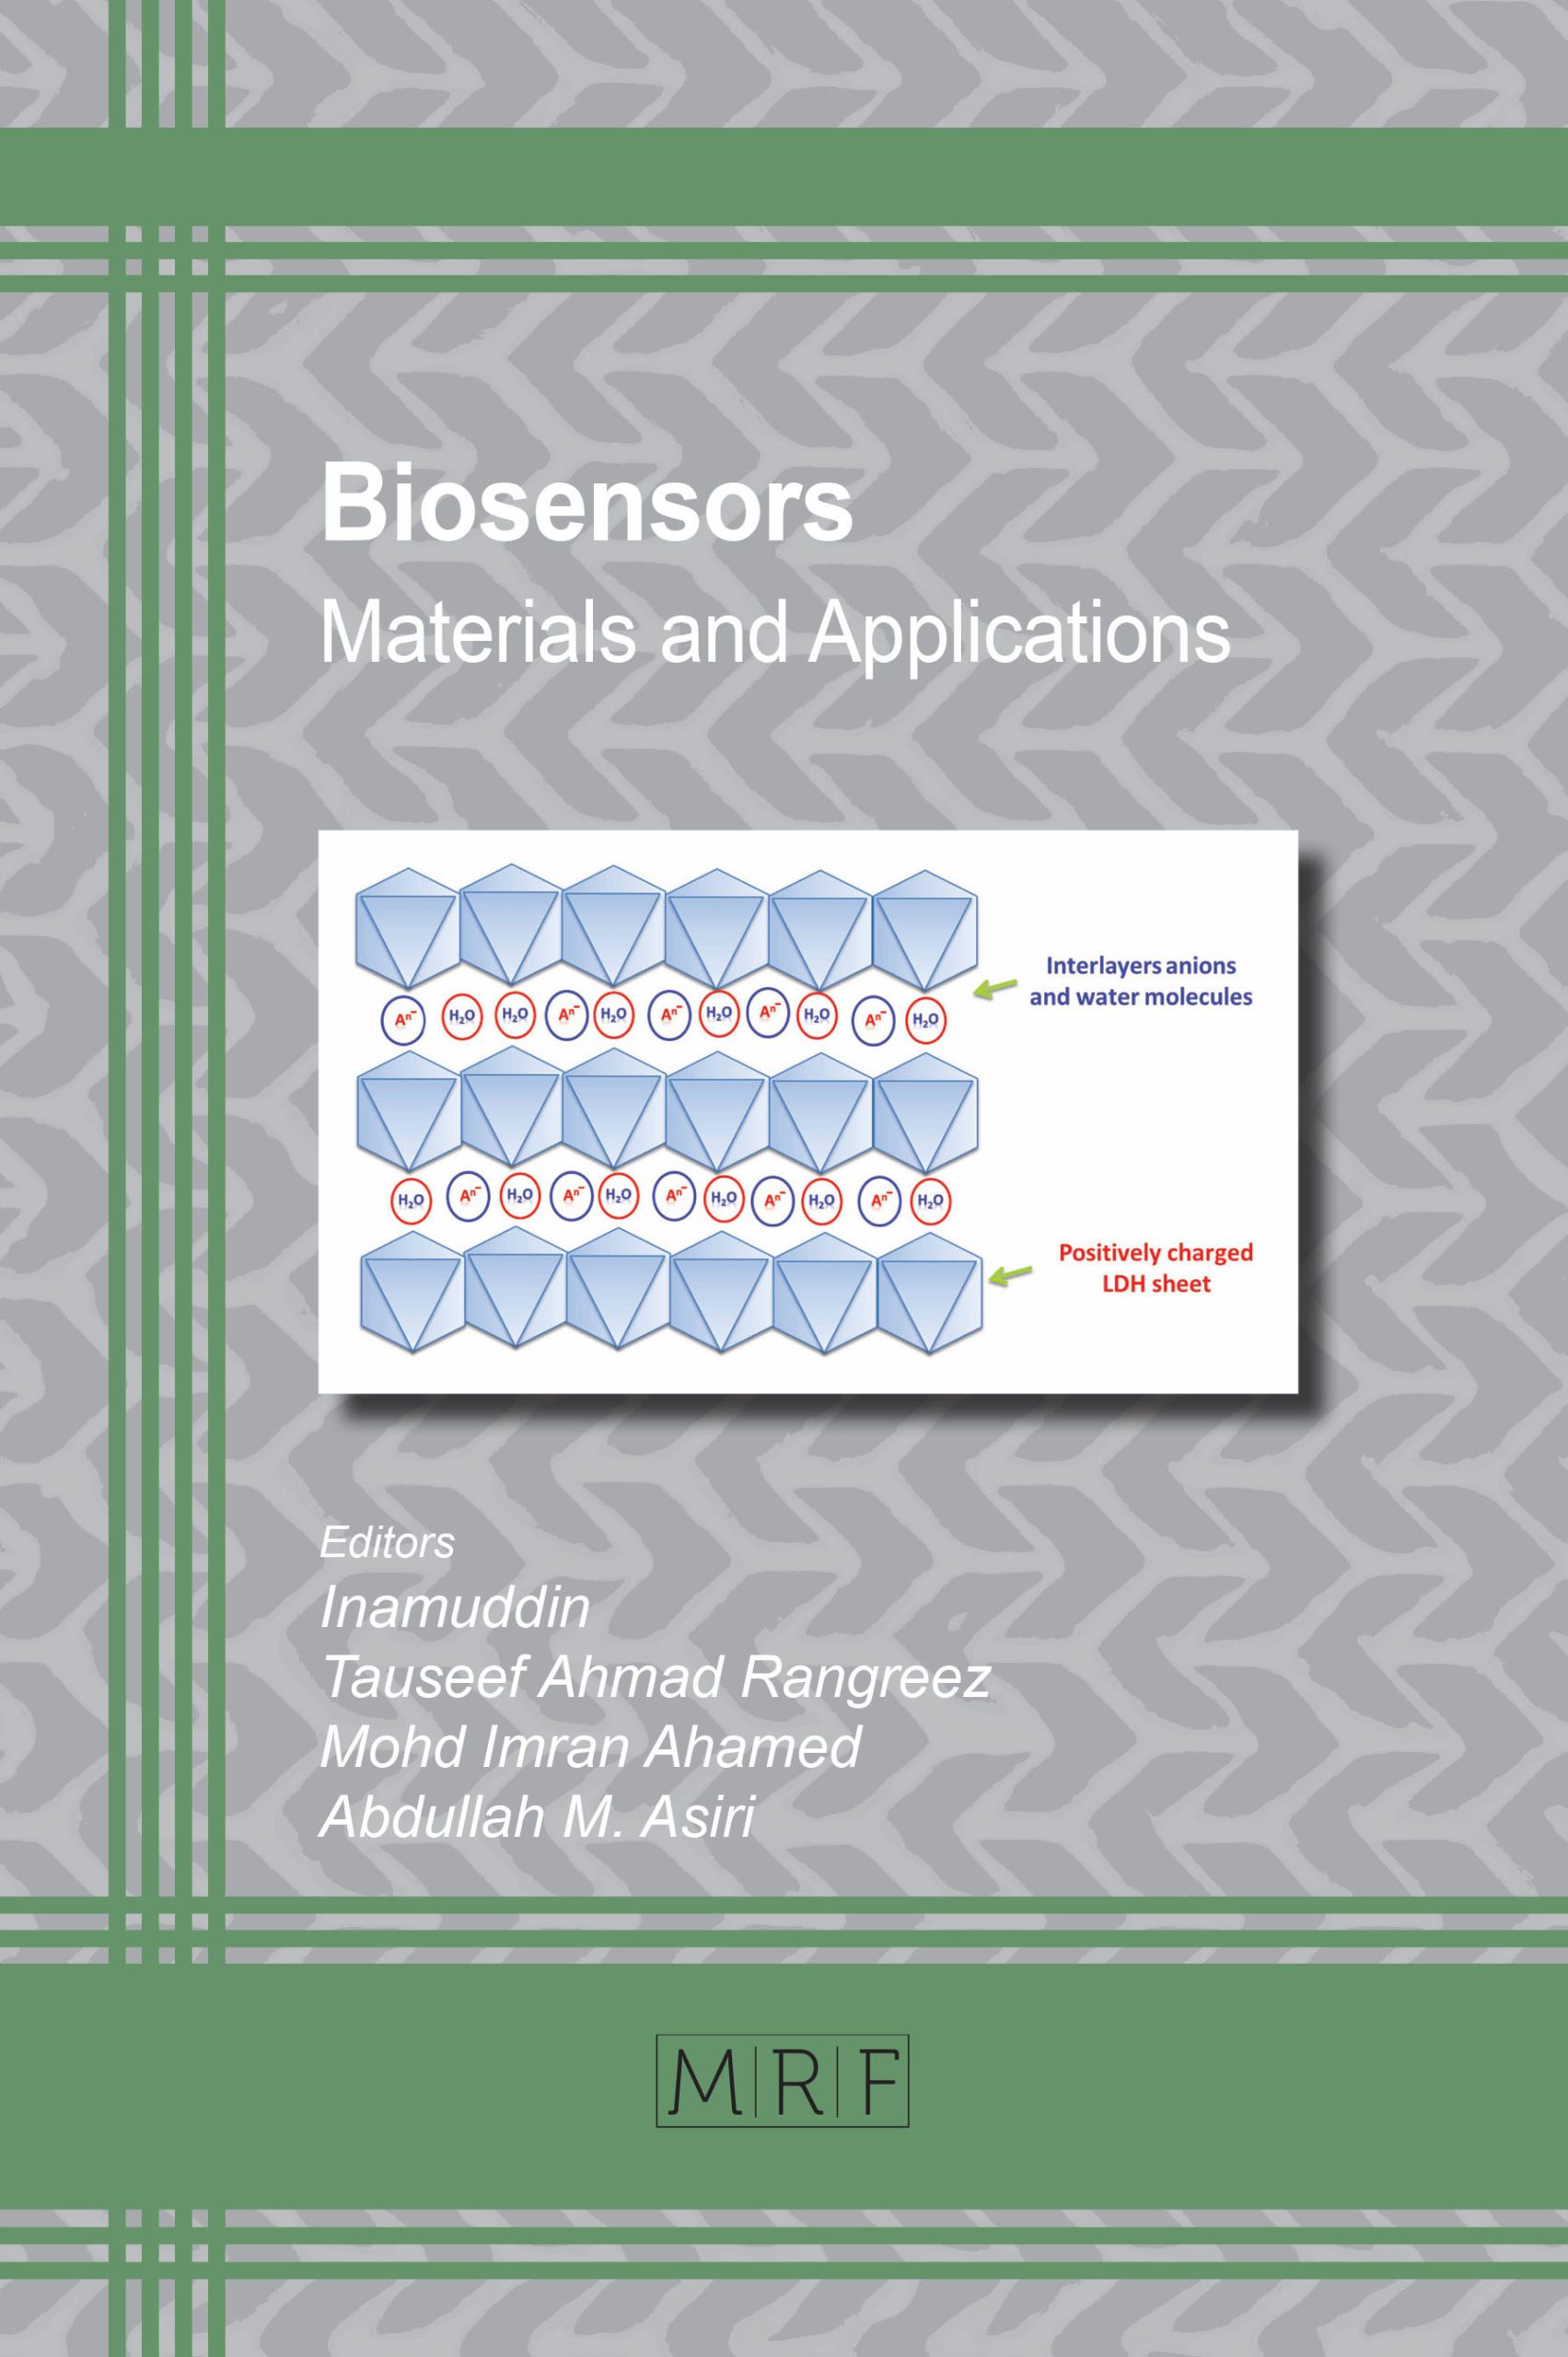 Research　Nanoparticles　Forum　Functional　Application　for　Materials　Biomarker　Detection　of　Metal